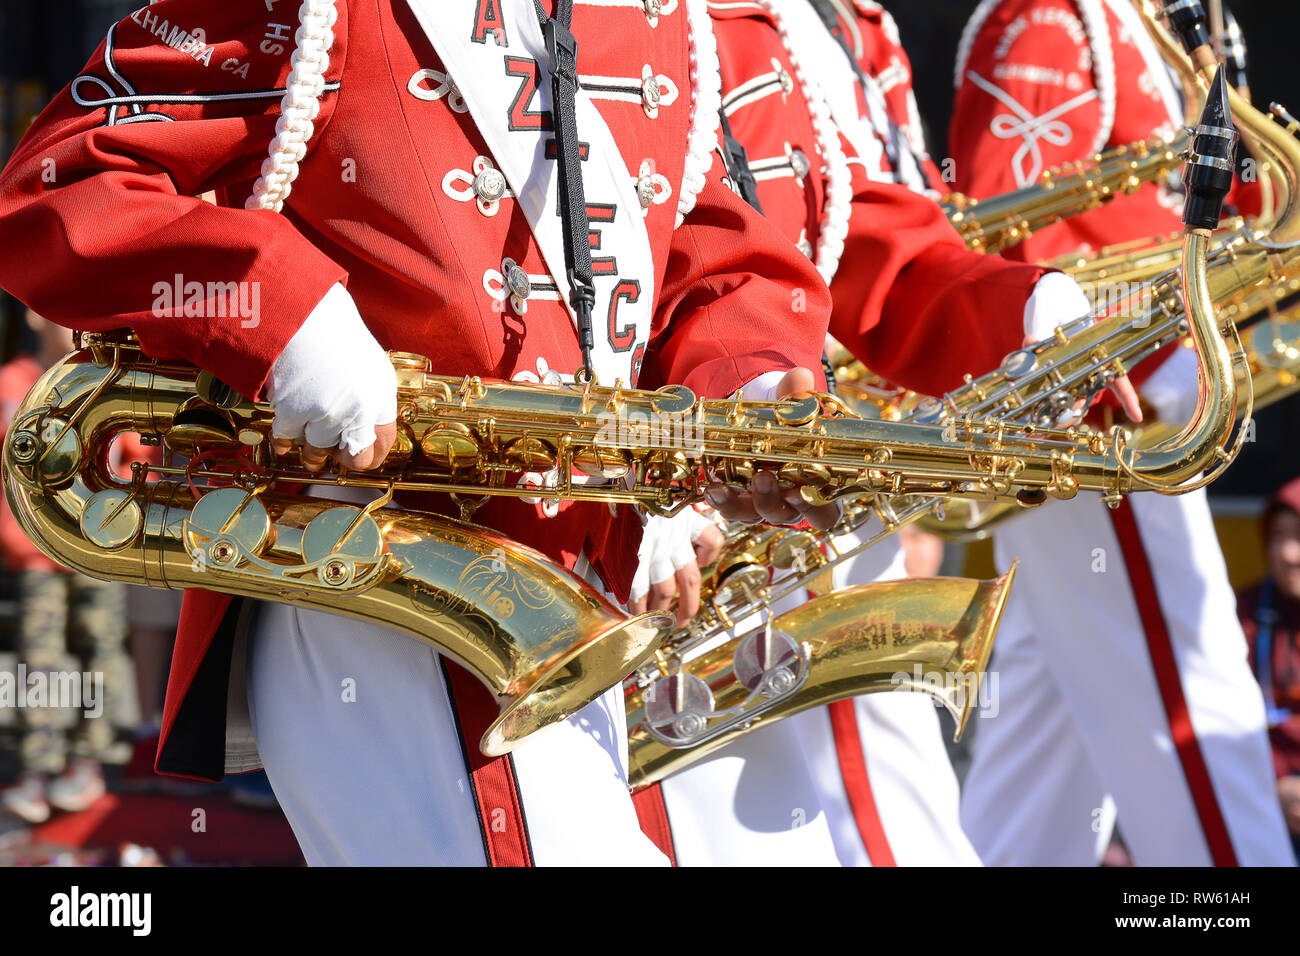 LOS ANGELES - FEBRUARY 9, 2019:  Aztec Marching Band closeup of saxophones at the Golden Dragon Parade, celebrating the Chinese New Year. Stock Photo